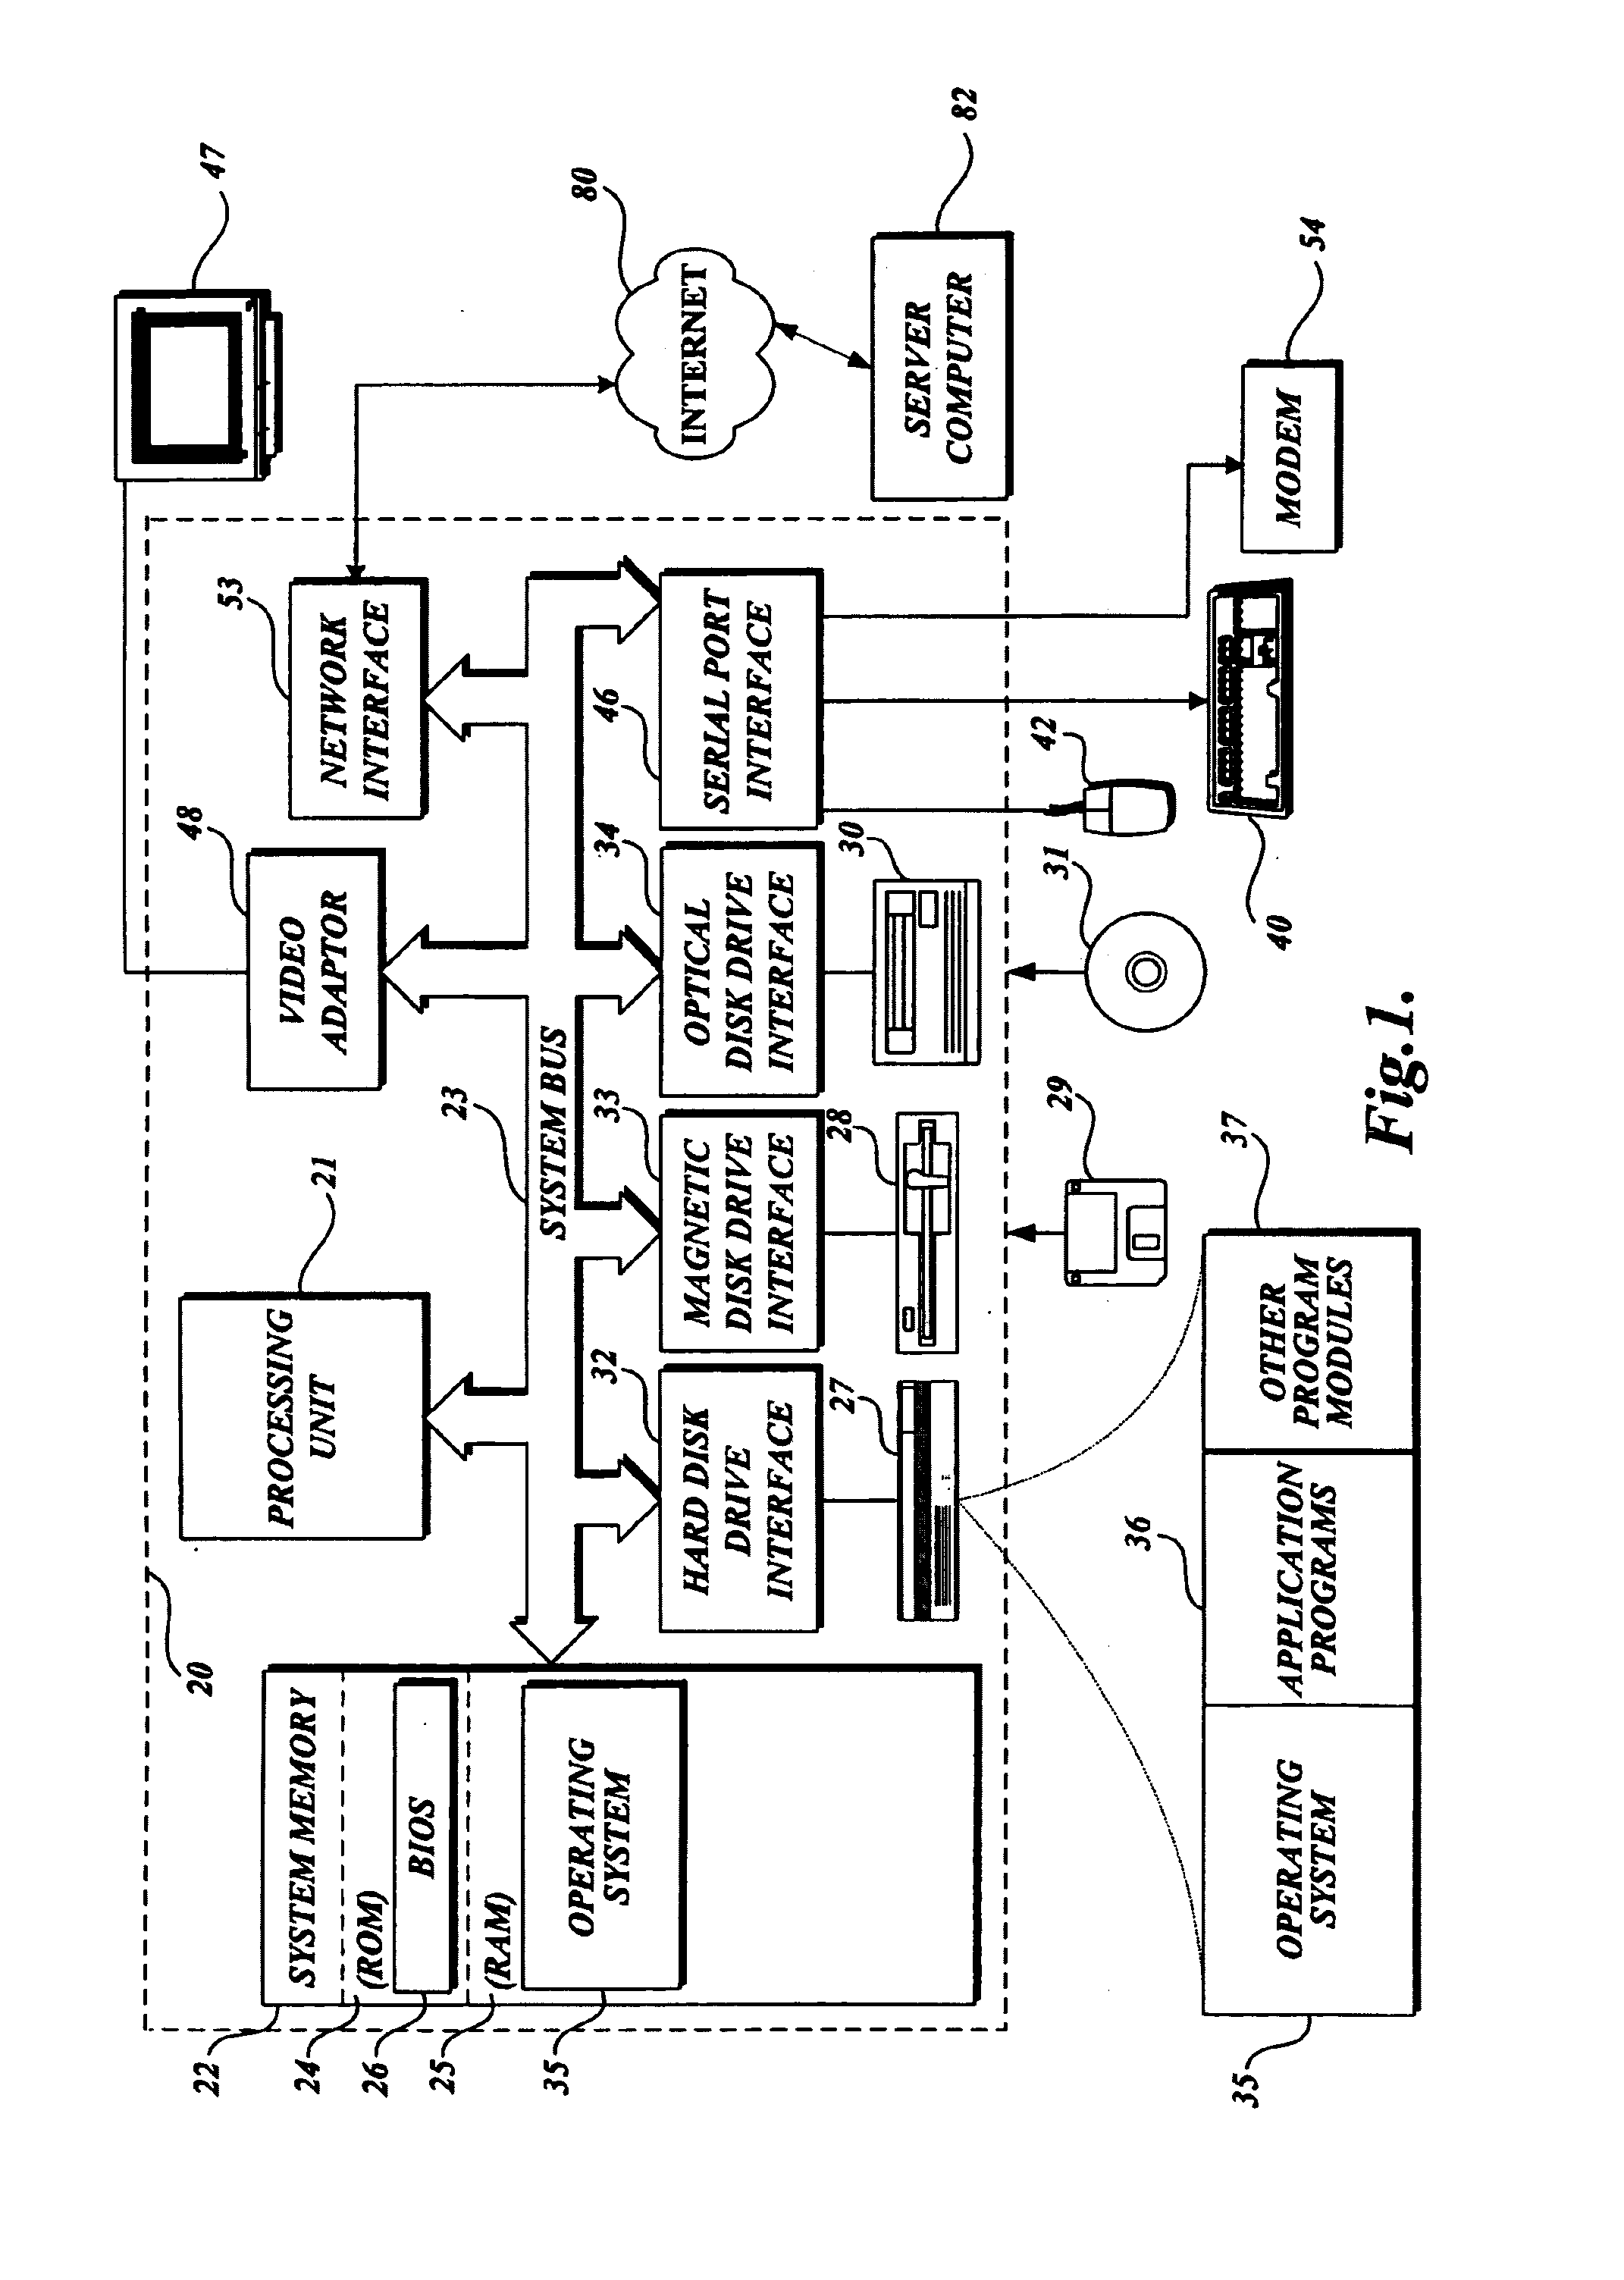 System and method for optimizing the data transfer between mirrored databases stored on both a client and server computer